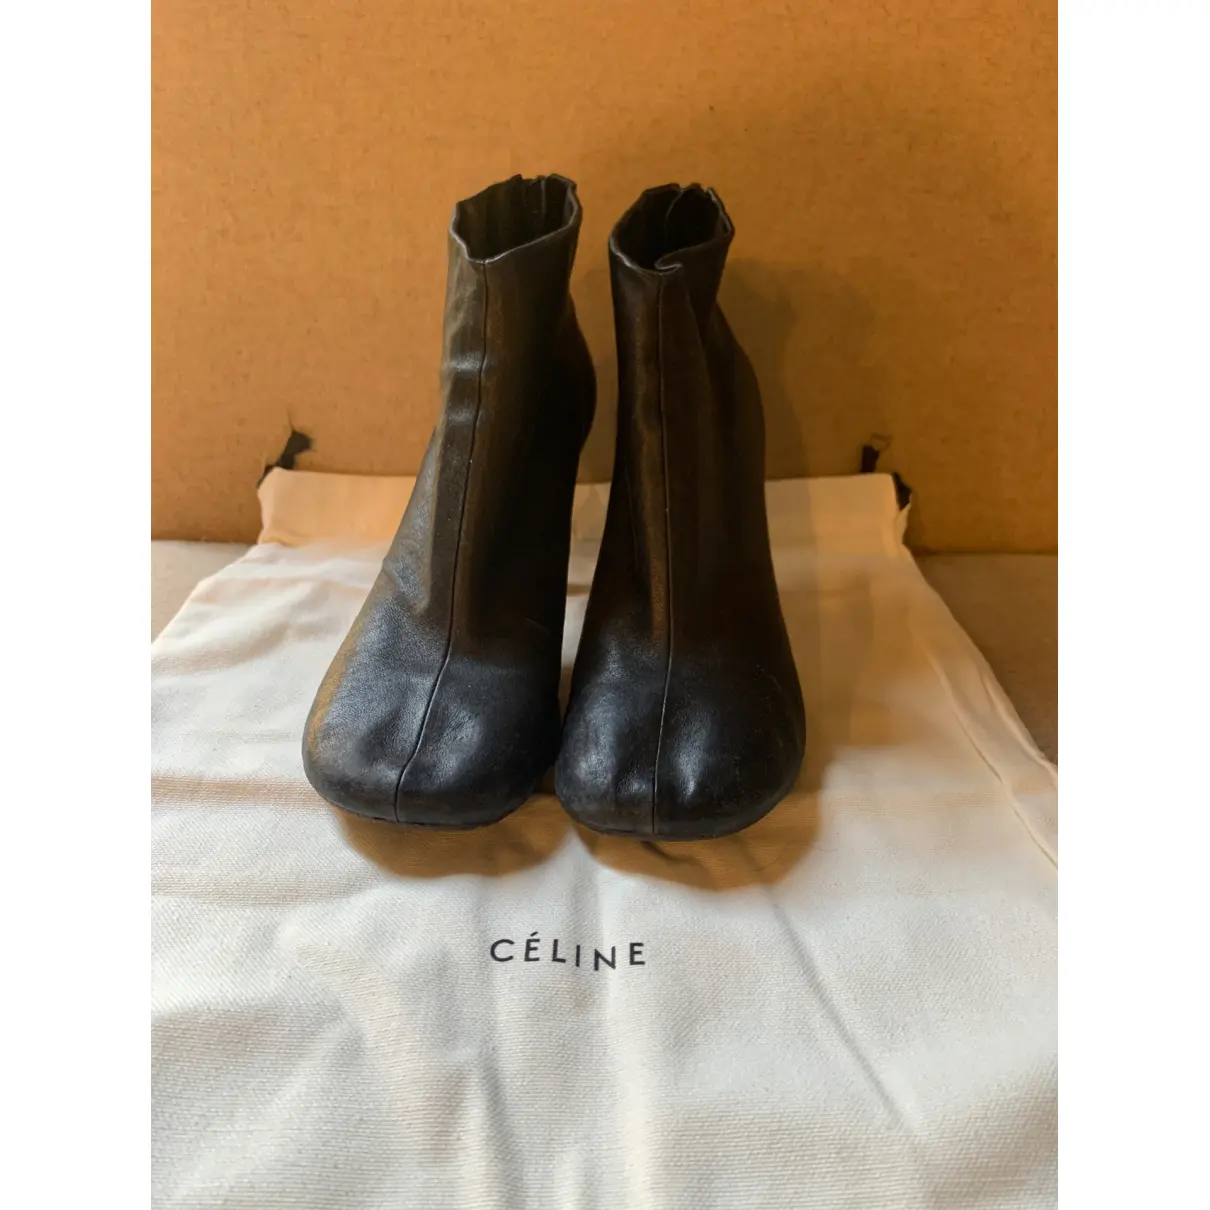 Buy Celine Glove Booties leather ankle boots online